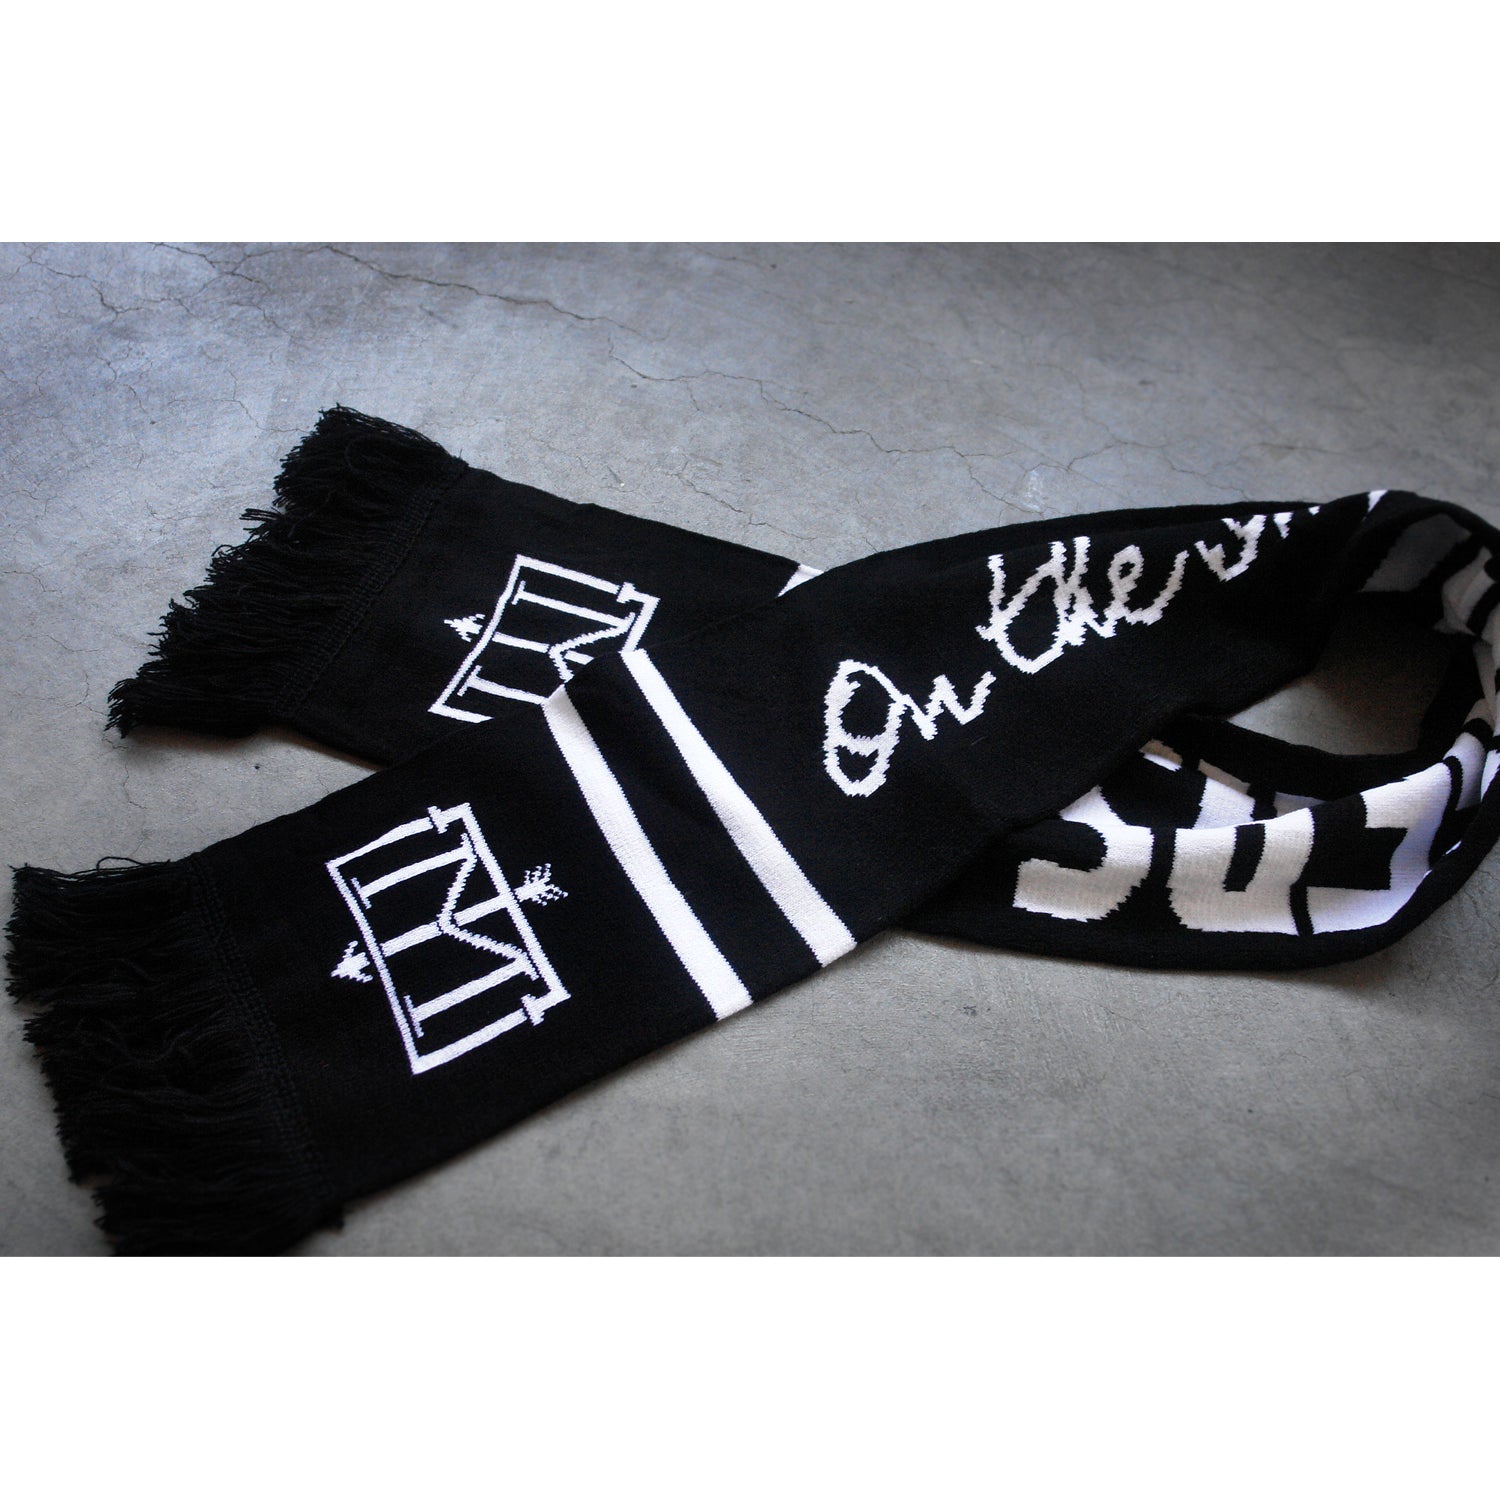 folded black and white scarf on a concrete floor. Menzingers T M emblem on the end next to the fringe